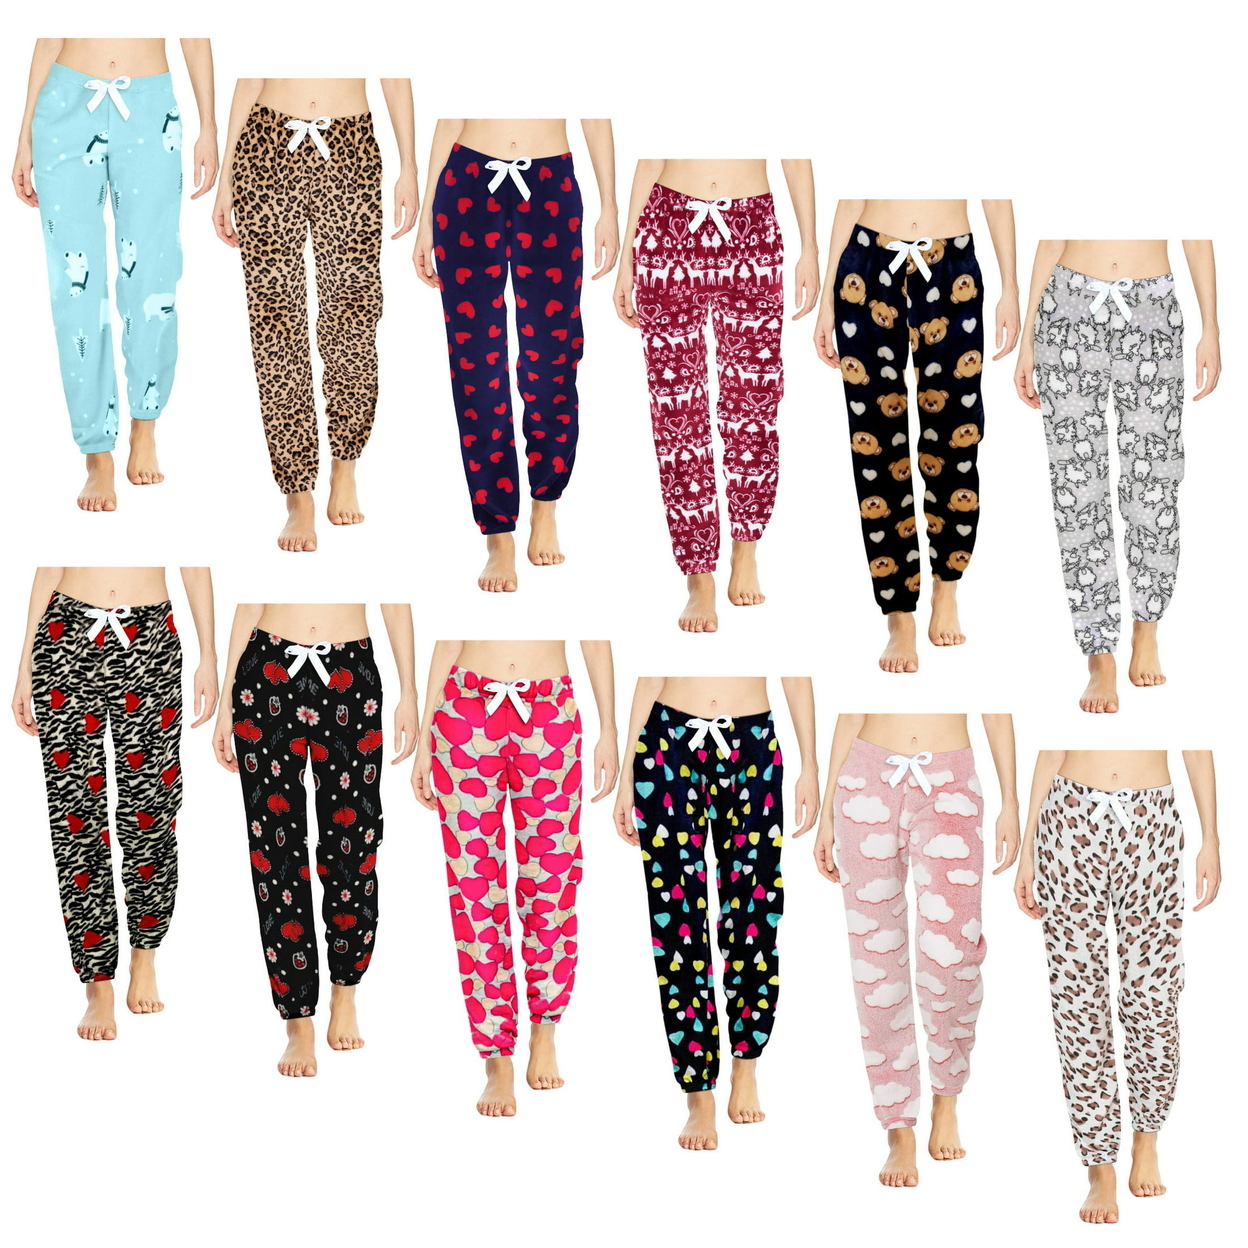 Multi-Pack: Women's Printed Ultra-Soft Comfy Stretch Micro-Fleece Pajama Lounge Pants - 1-pack, Love, Large